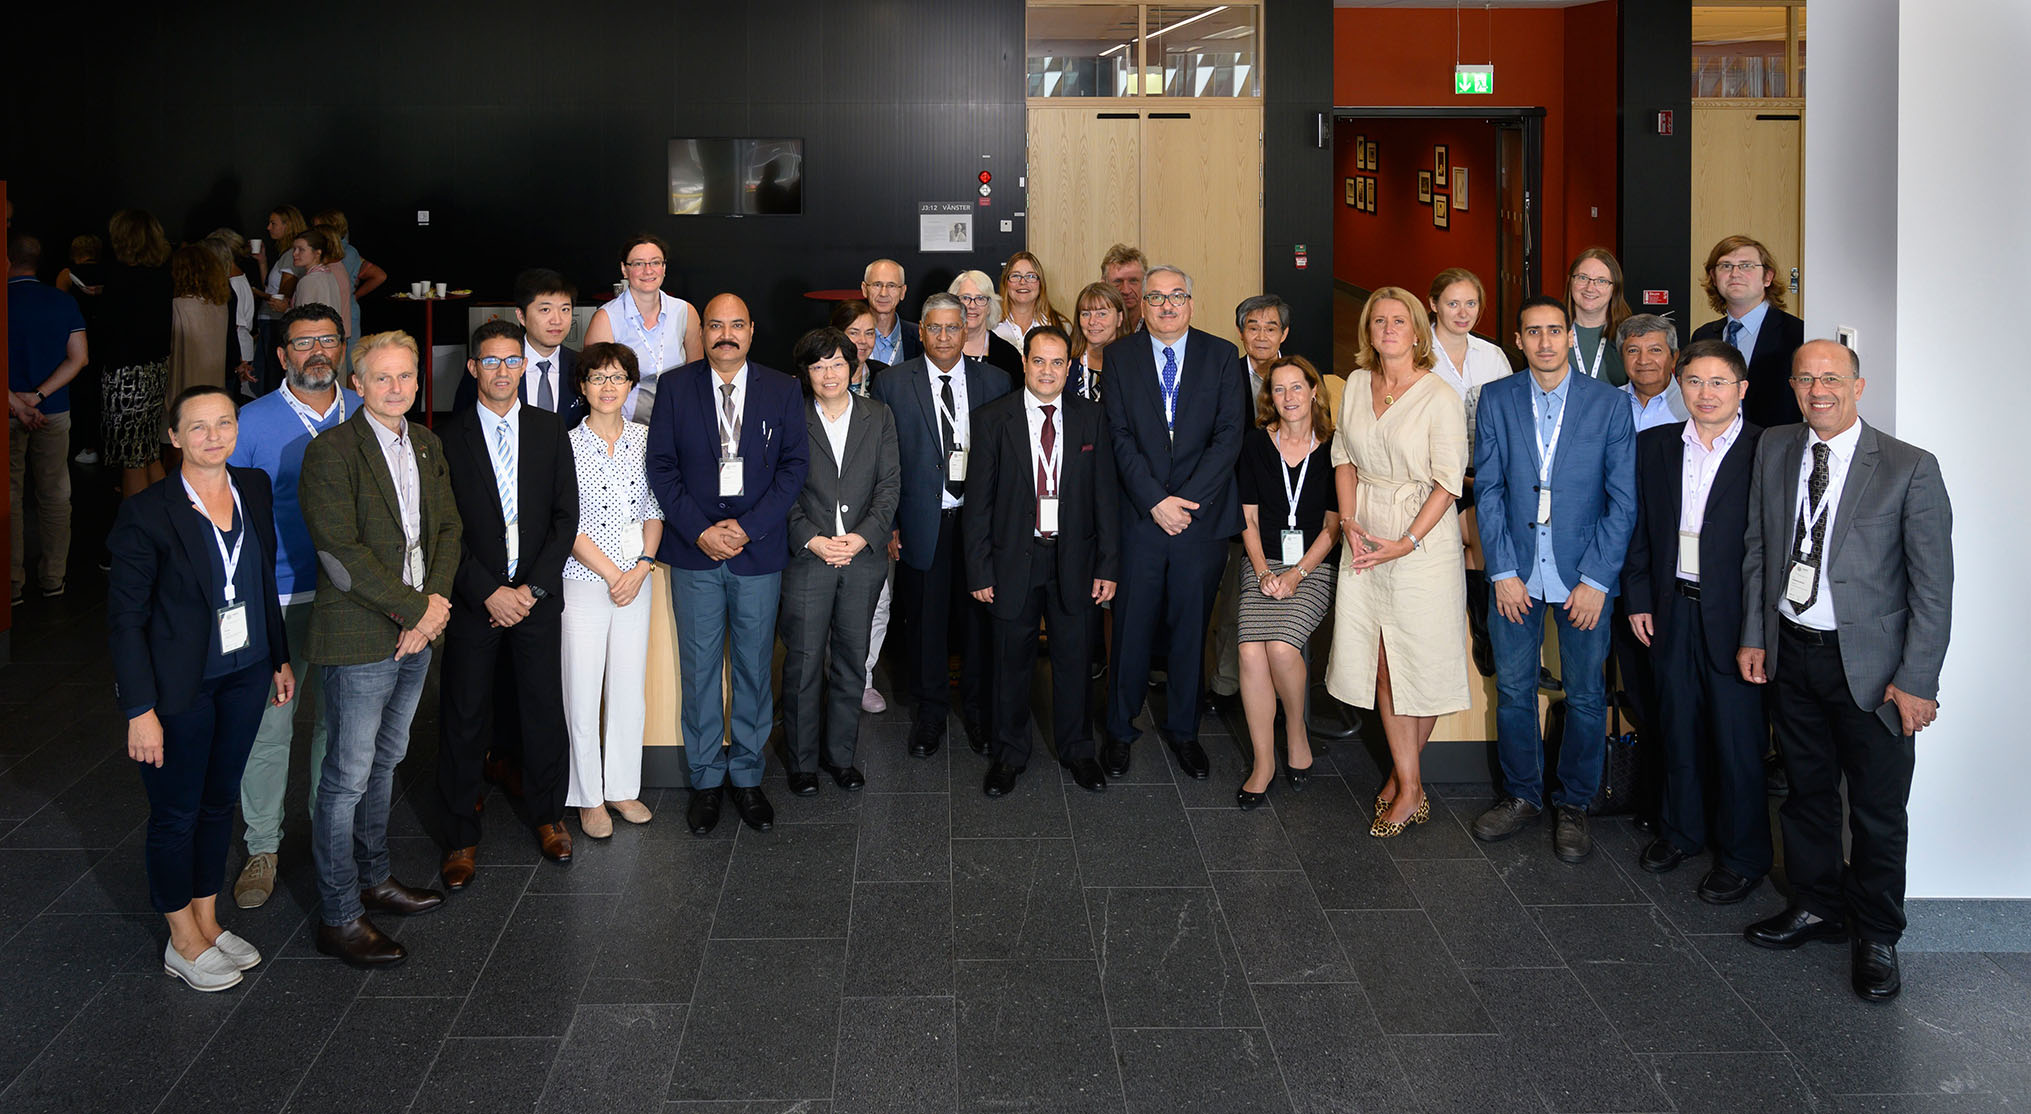 WSV 2019: The First Committee Meeting of the World Society for Virology